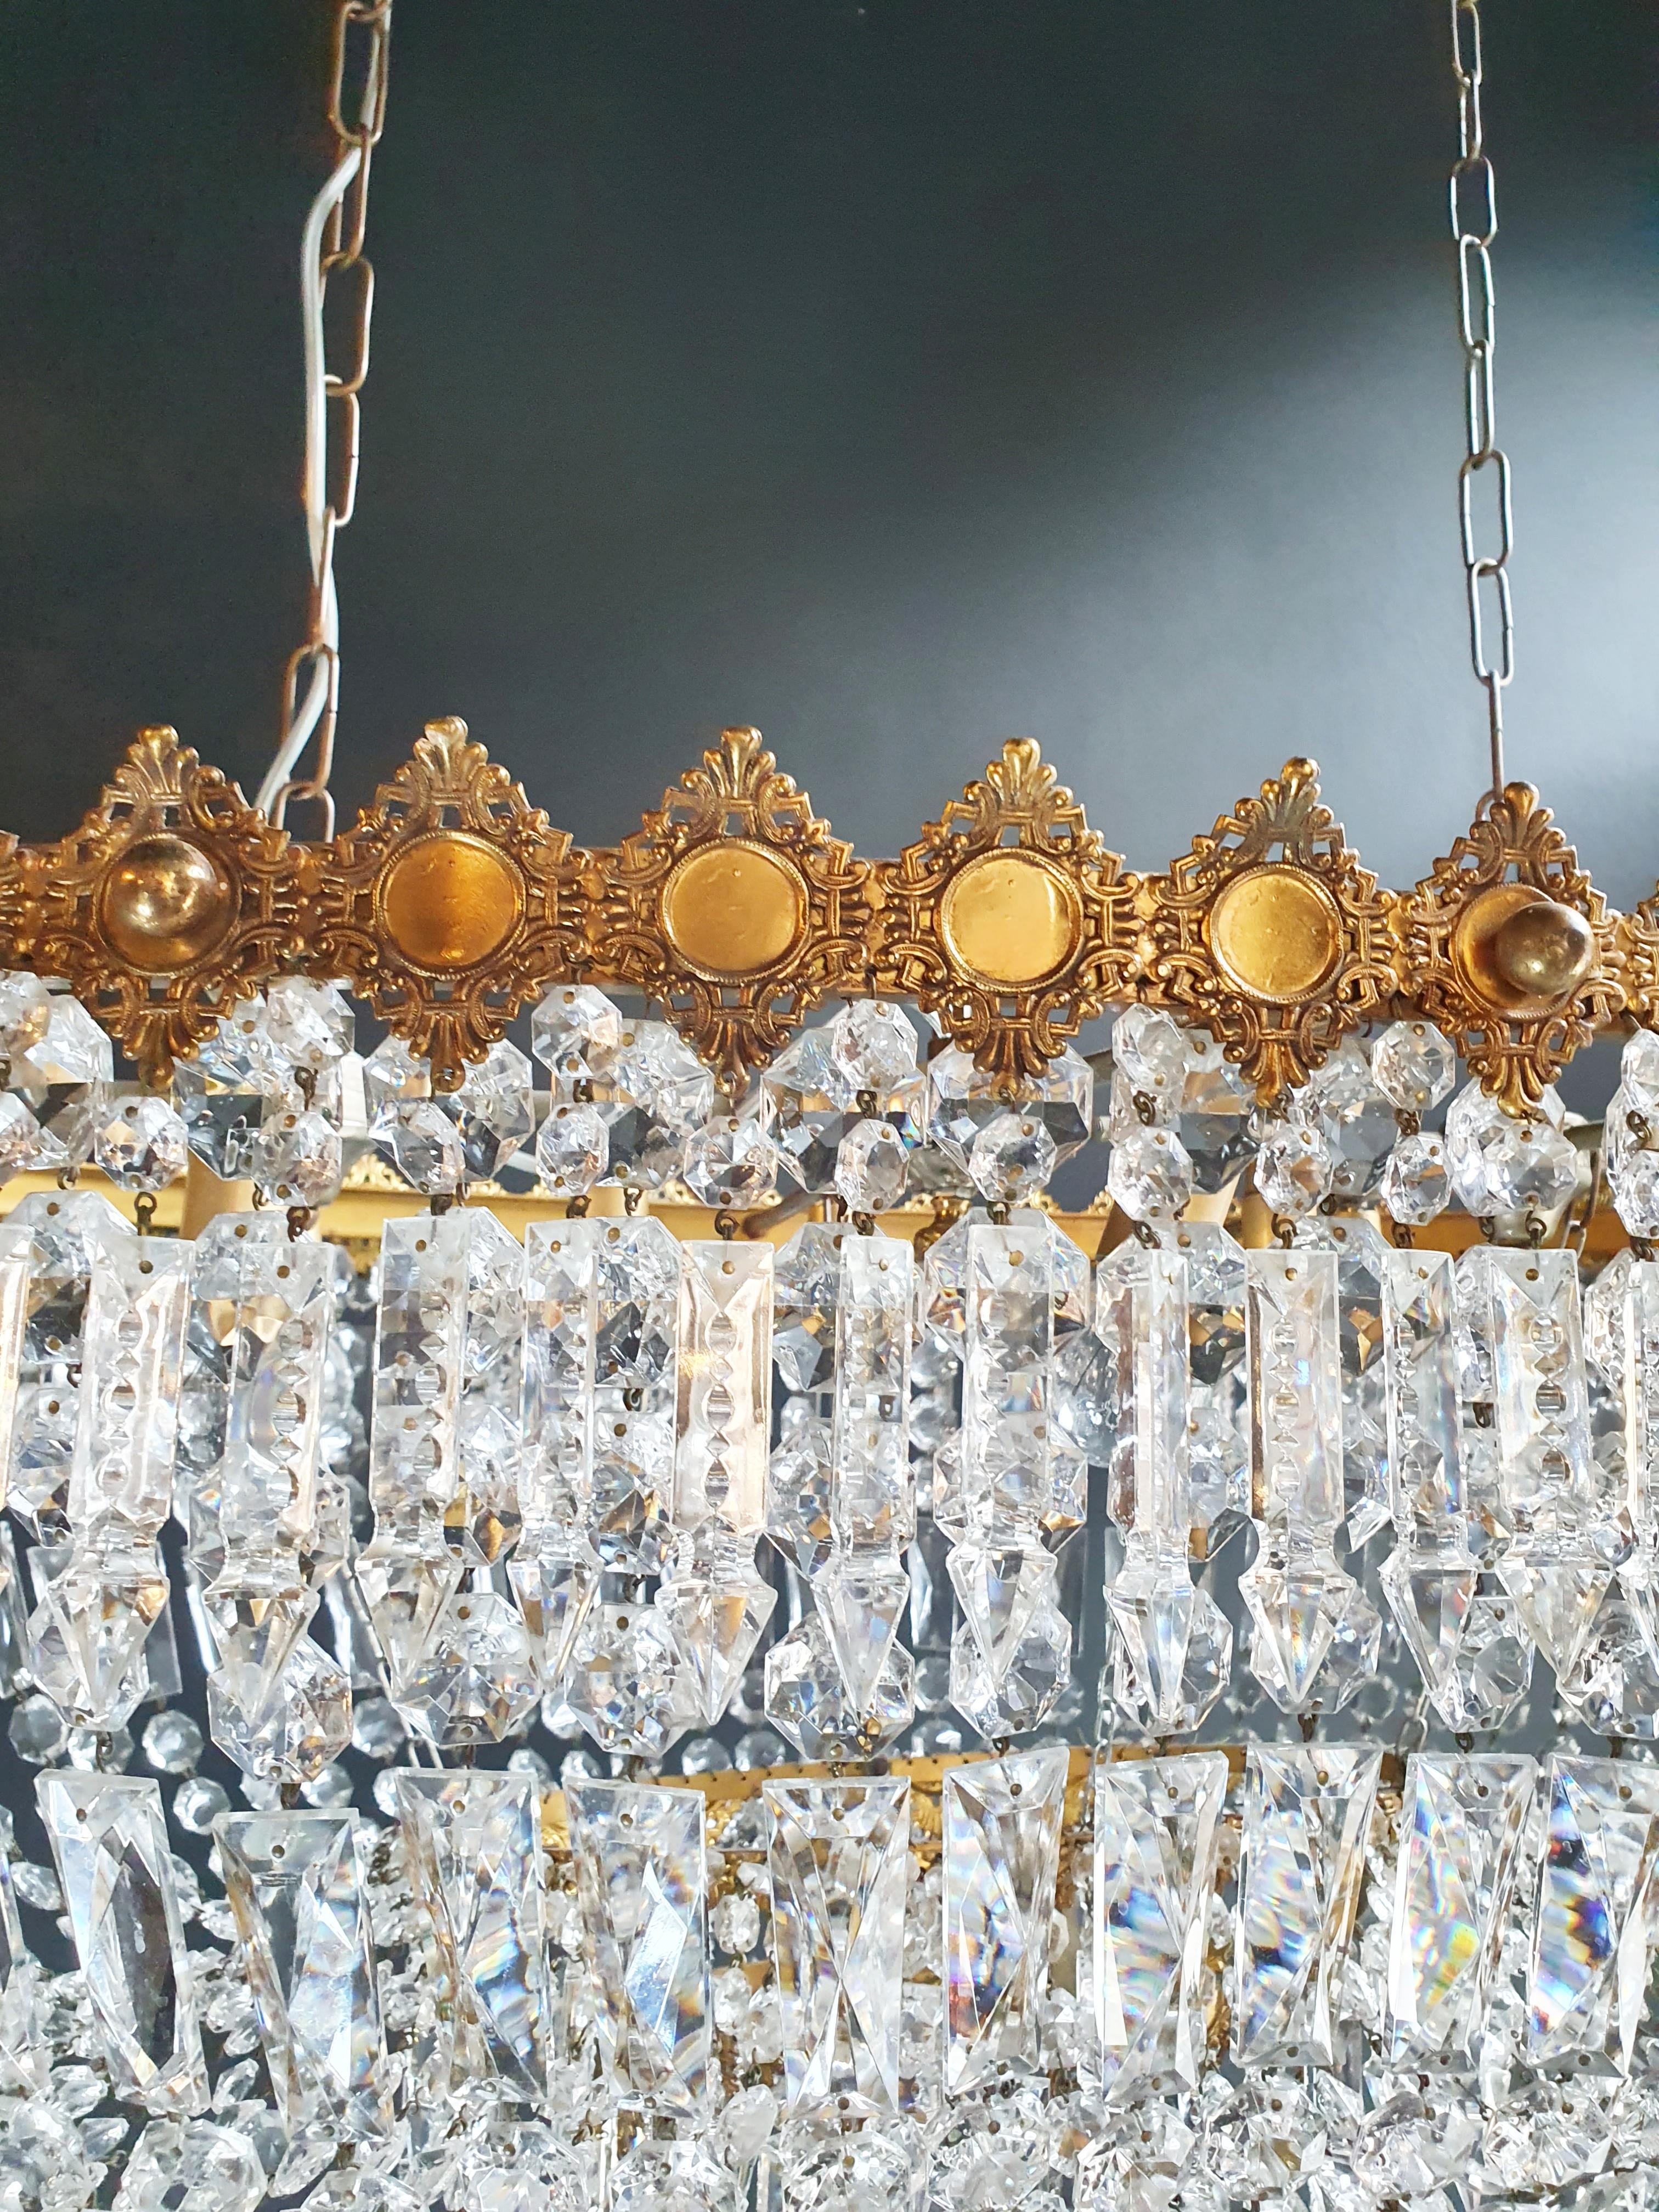 Low oval ceiling crystal chandelier brass.
Cabling completely renewed. Crystal hand knotted.
Measures: Total height 100 cm, height without chain 48 cm, diameter 100 x 65 cm. weight (approximately) 15kg.

Number of lights: 10-light bulb sockets: